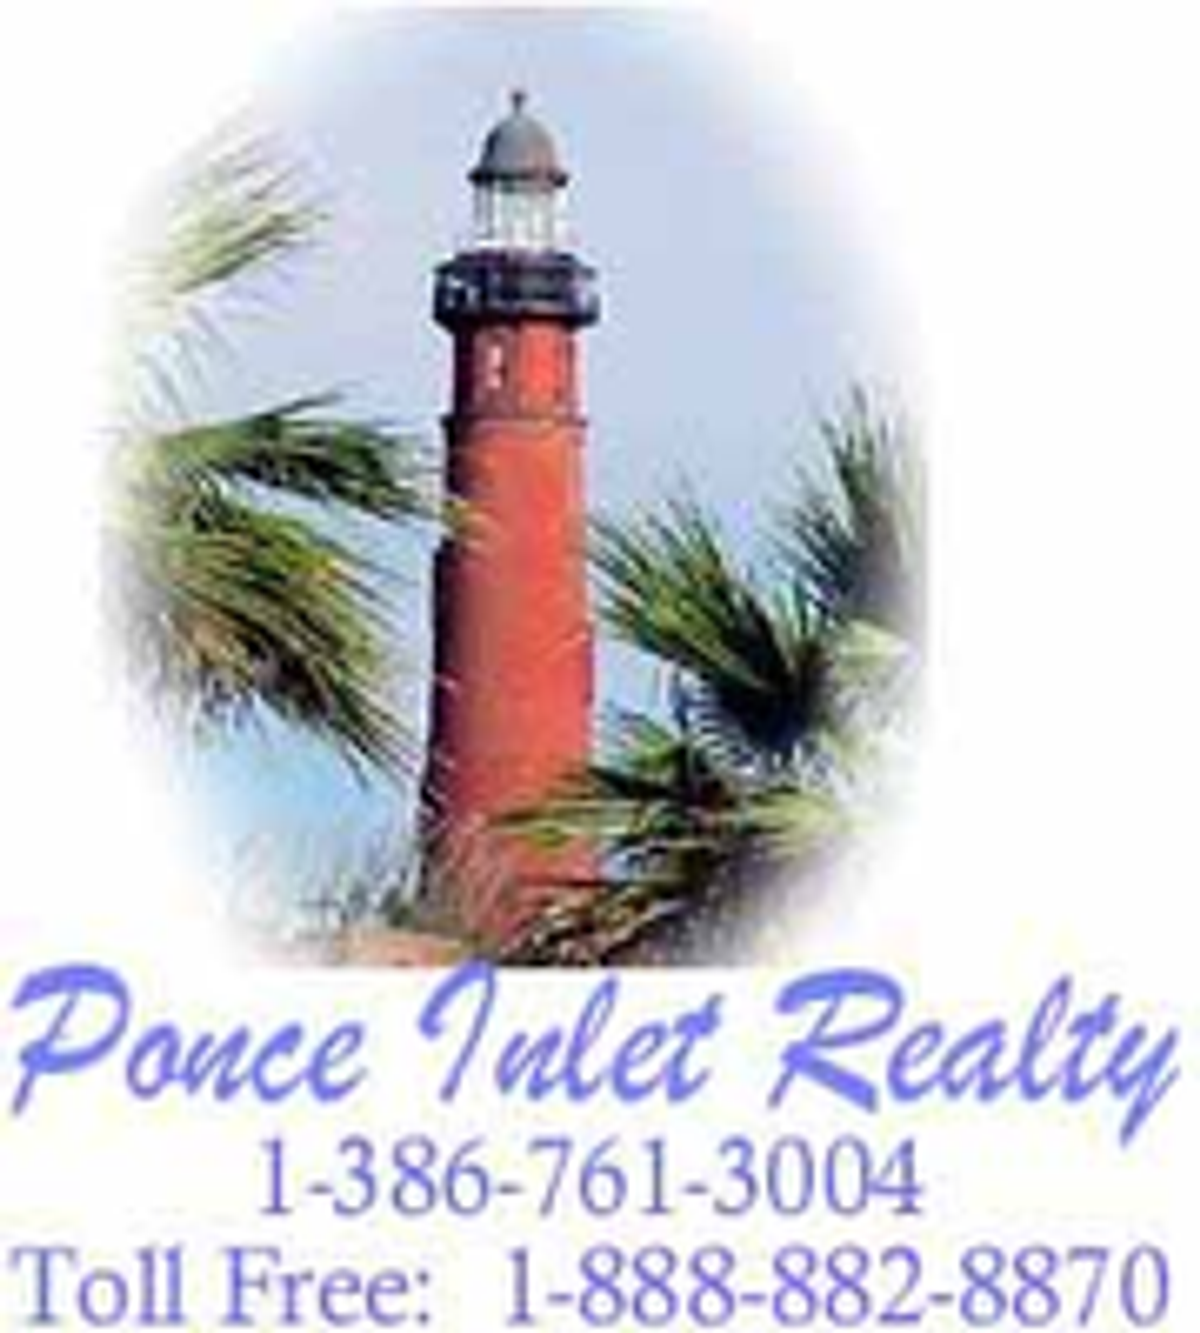 Photo for Tony Poma, Listing Agent at Ponce Inlet Realty, Inc